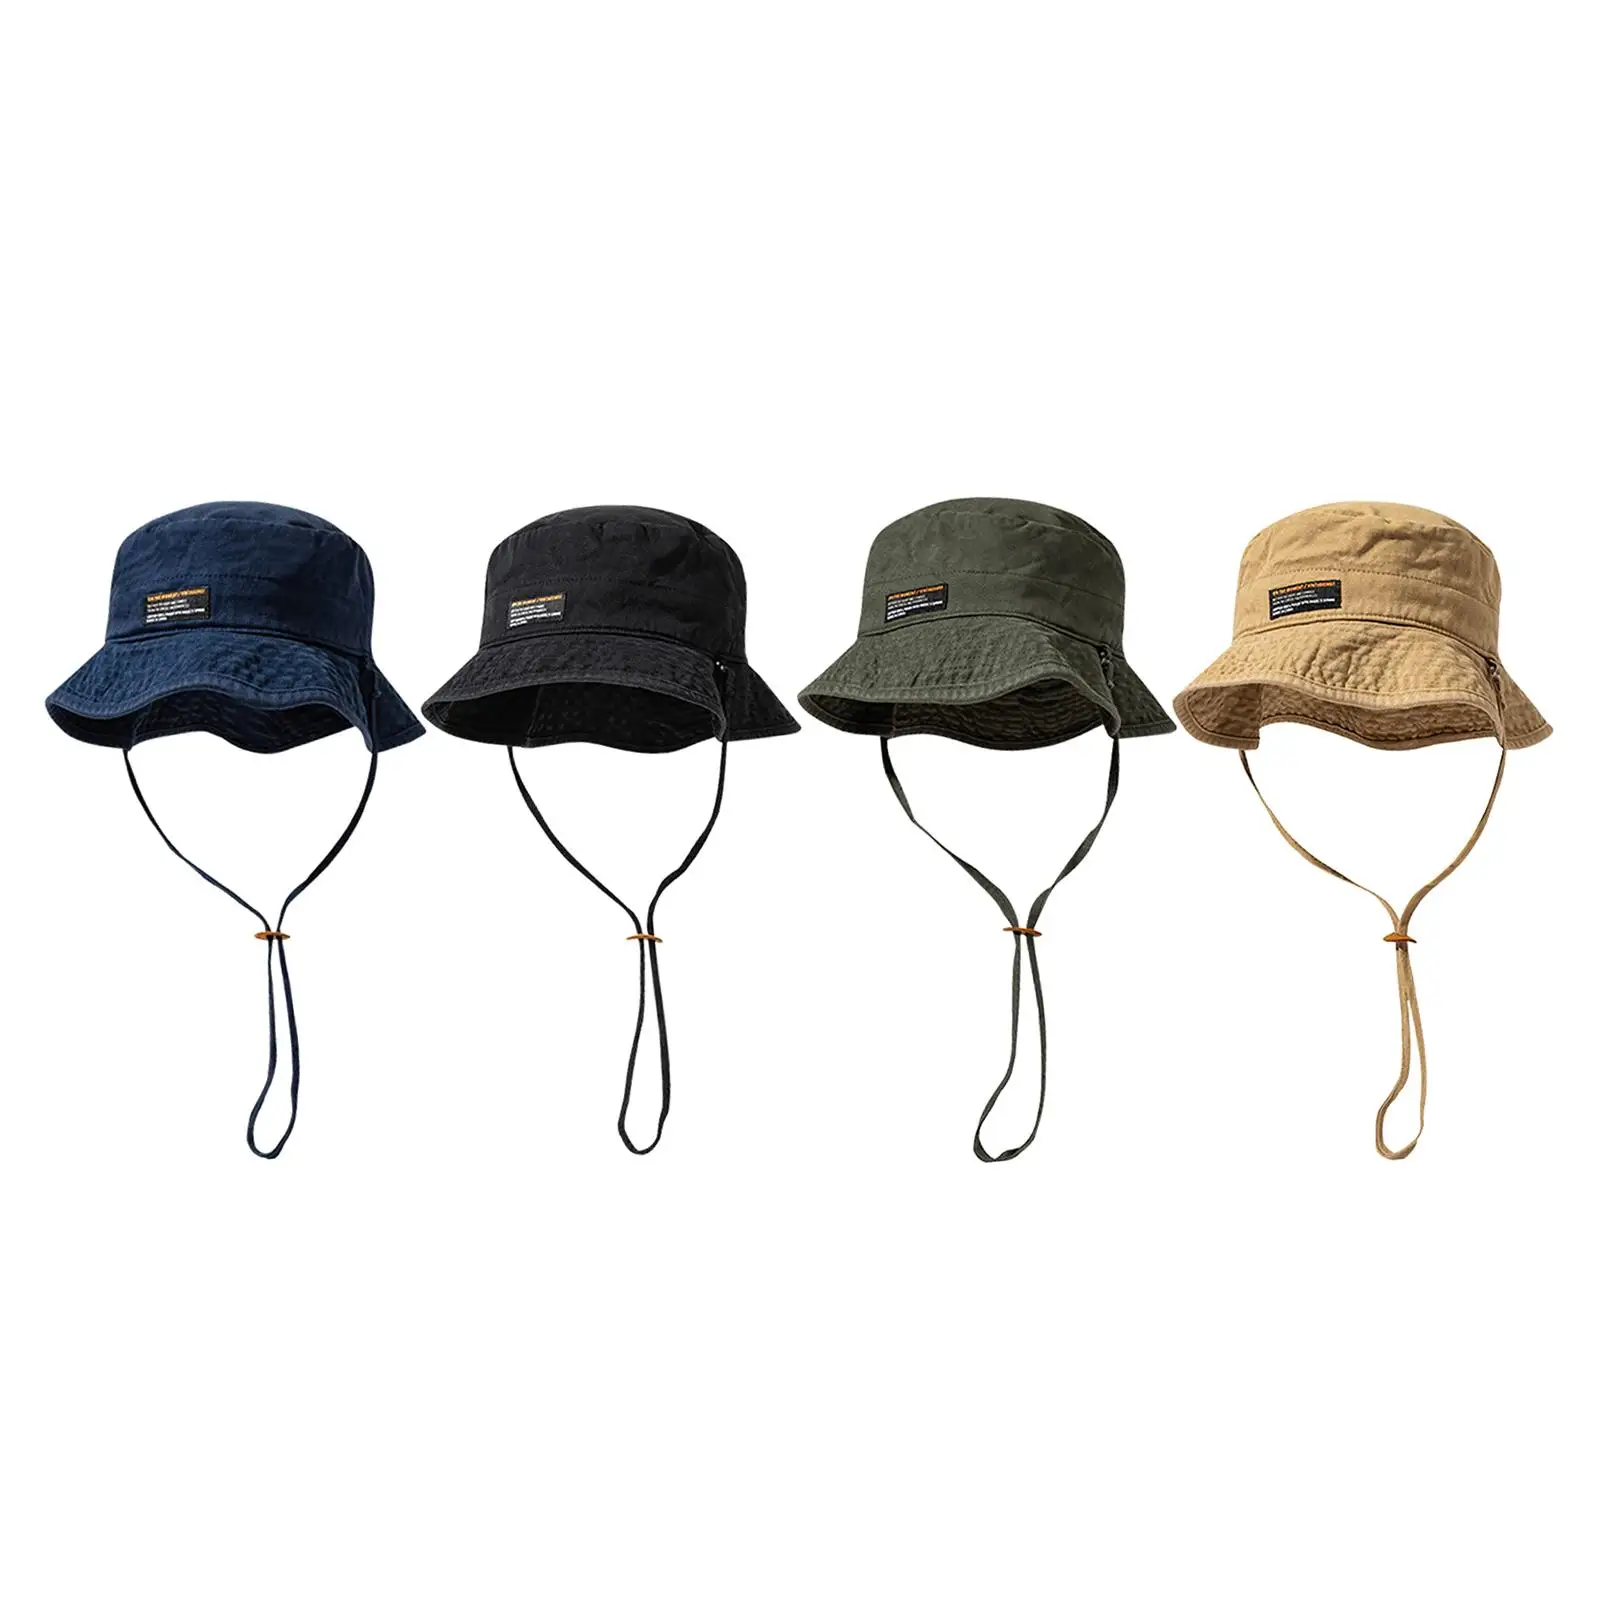 Unisex Bucket Hat Double Sided Cotton Sun Protection Travel Outdoor Beach